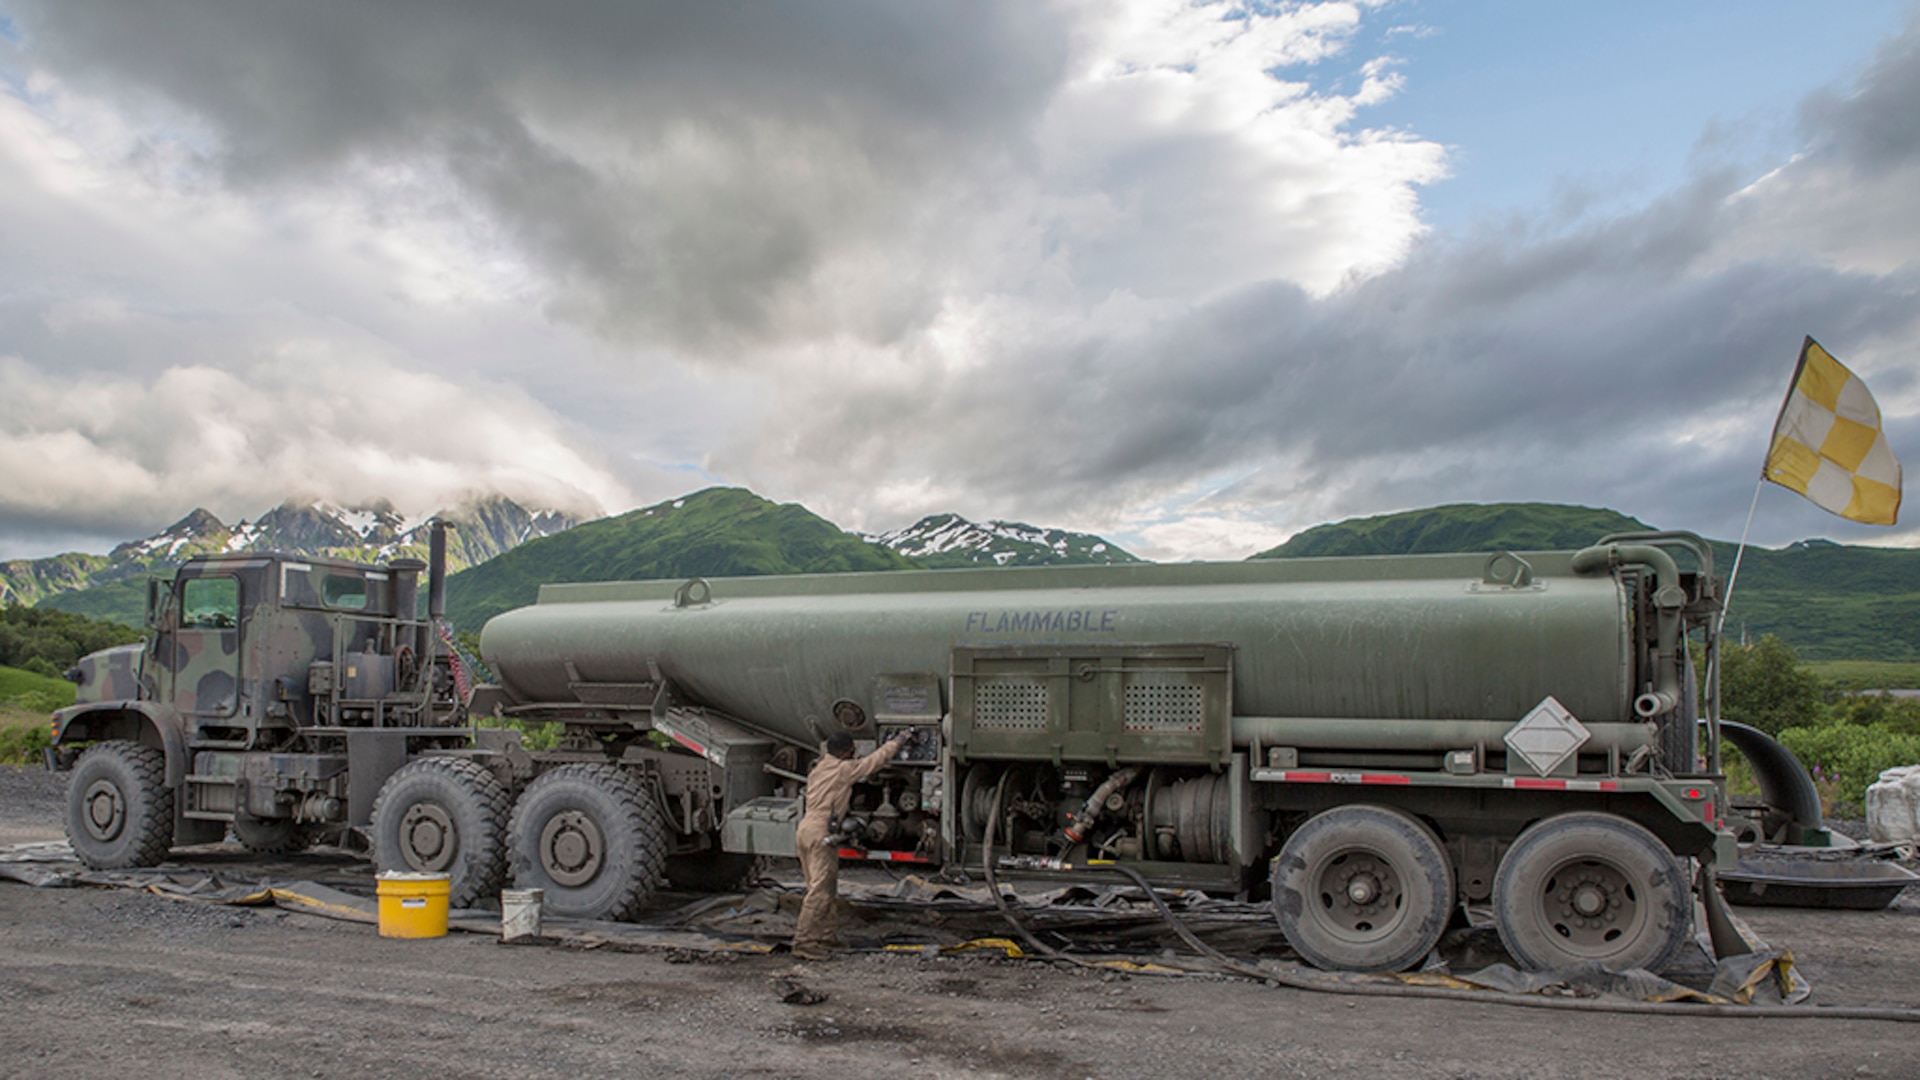 Cpl. Kuwyn Diggs, a semitrailer refueler operator with Detachment (-), Marine Wing Support Squadron-472, Marine Aircraft Group 49, 4th Marine Aircraft Wing, Marine Forces Reserve, performs maintenance on an AMK 970 semitrailer refueler during Innovative Readiness Training Old Harbor, Alaska, July 10, 2016. IRT Old Harbor is part of a civil and joint military program to improve military readiness while simultaneously providing quality services to underserved communities throughout the United States. 